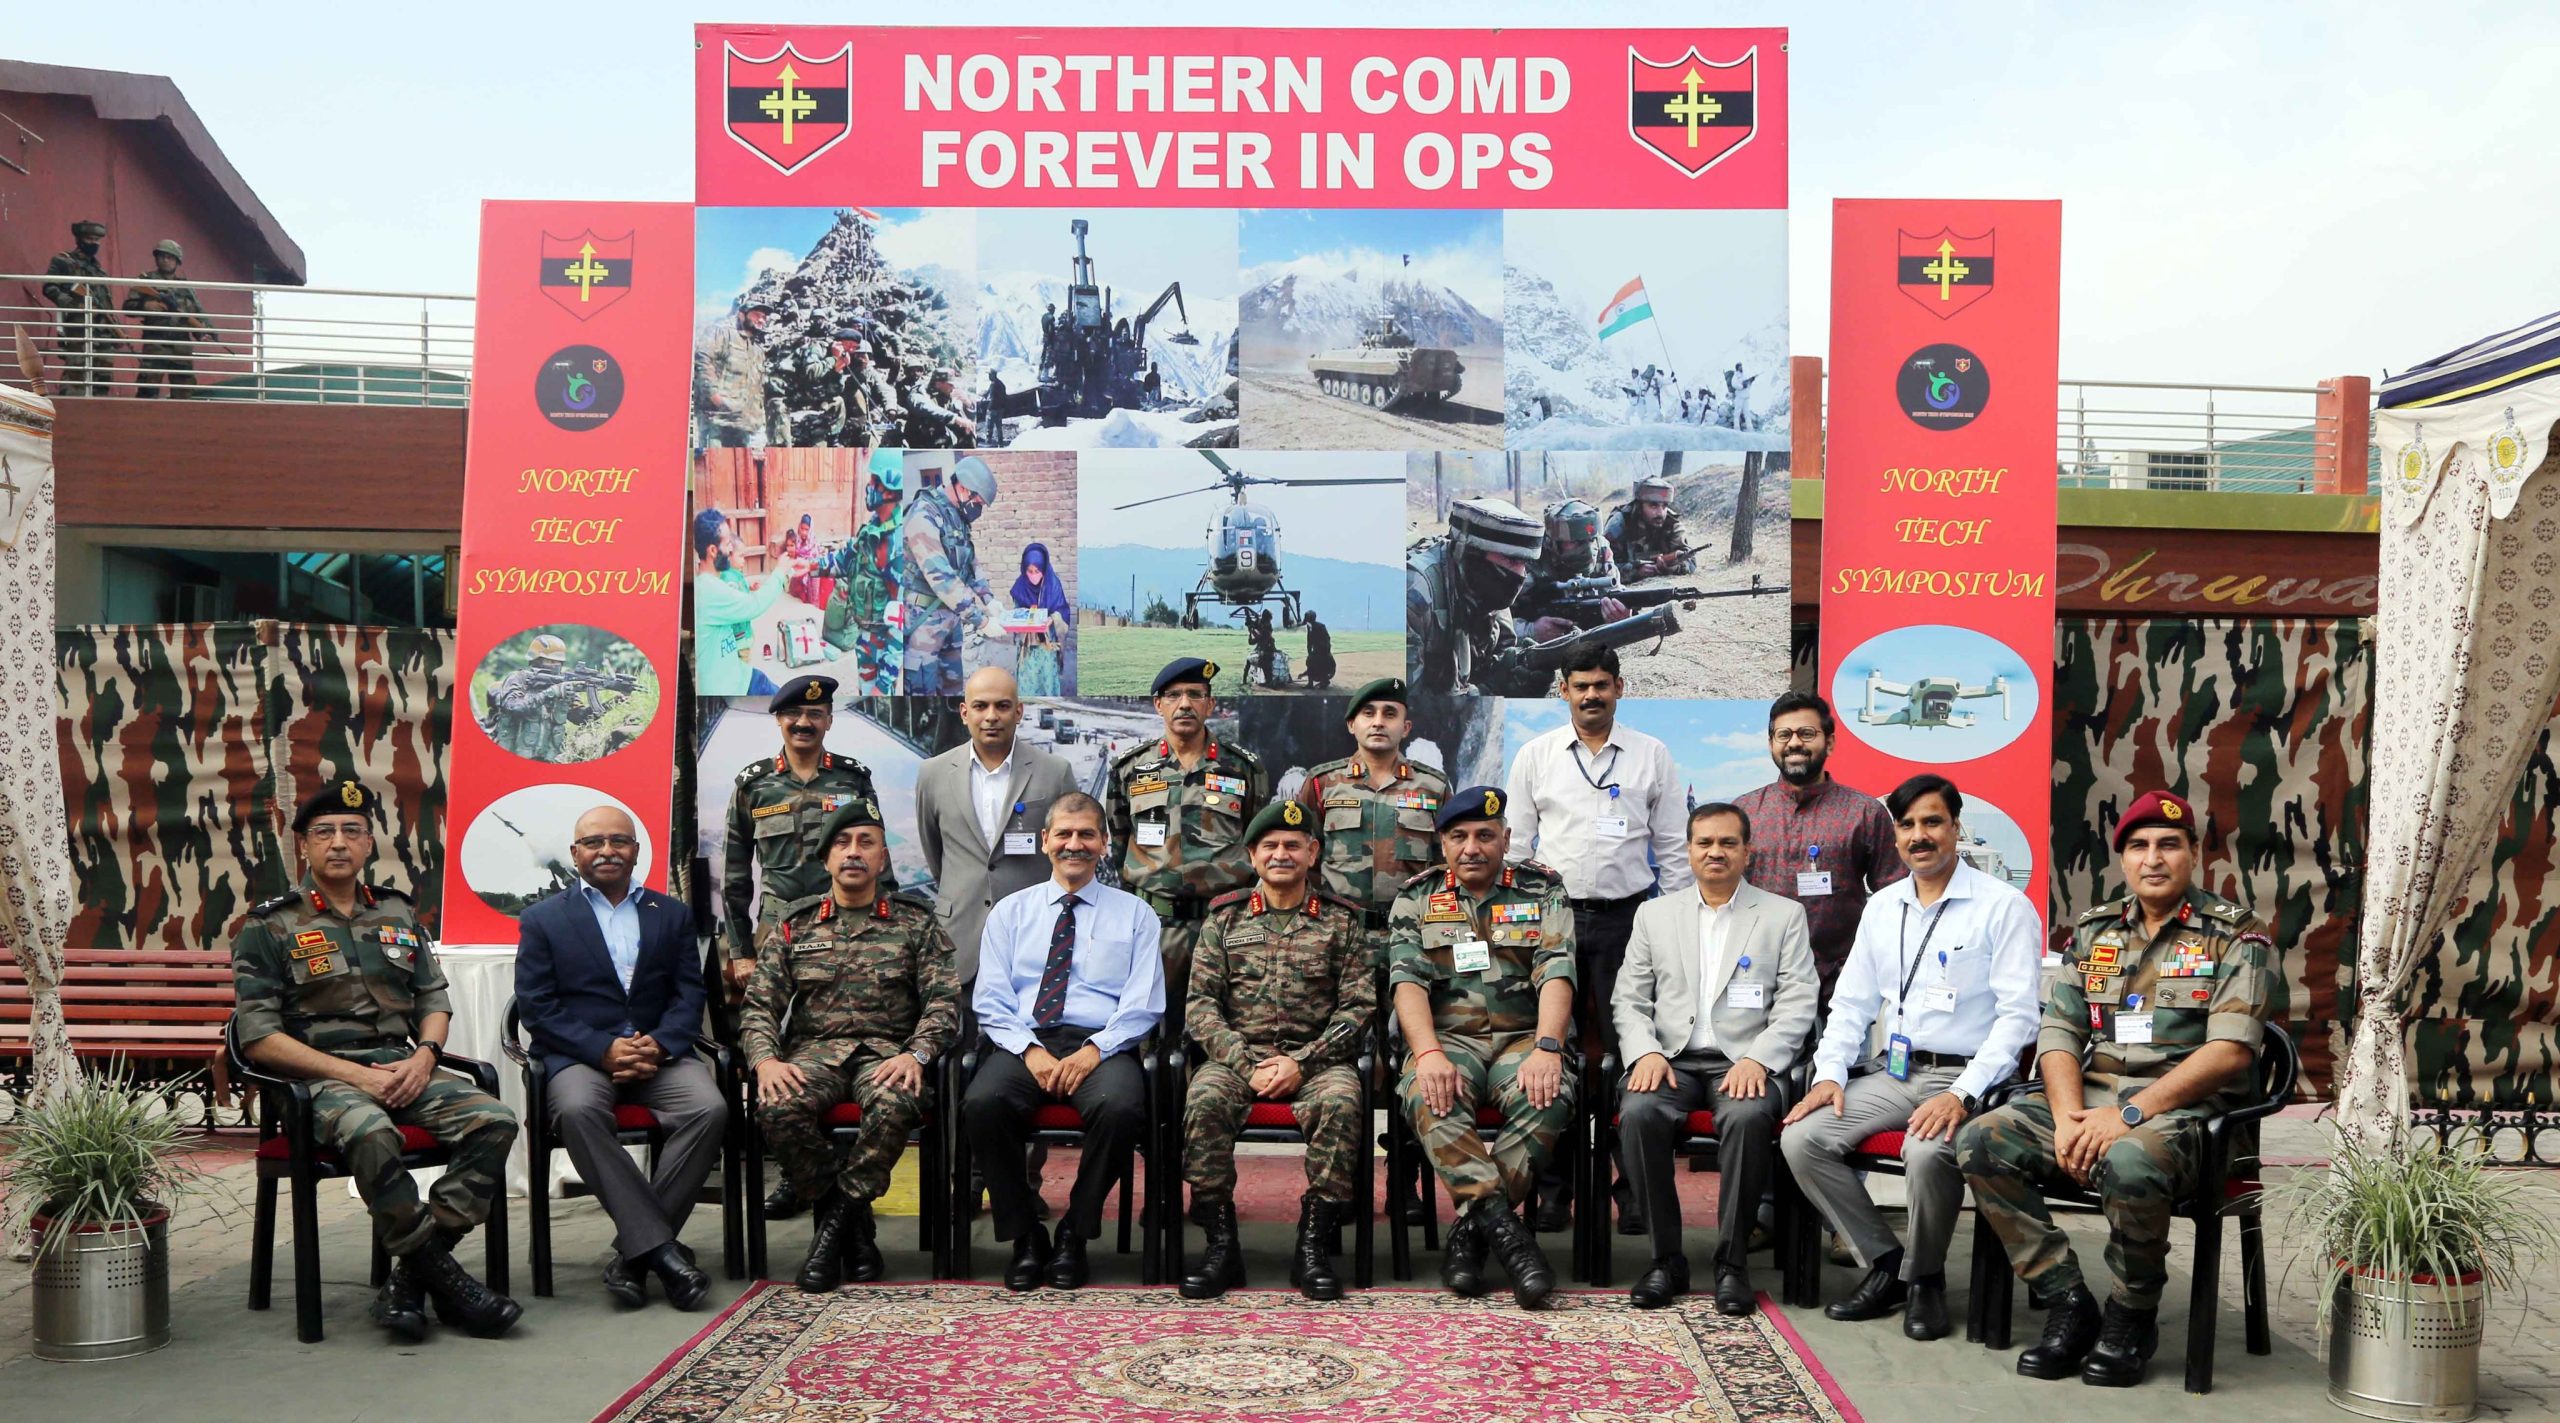 ‘North Tech Symposium 2022’ begins in J-K; Army says focus on identifying new technologies